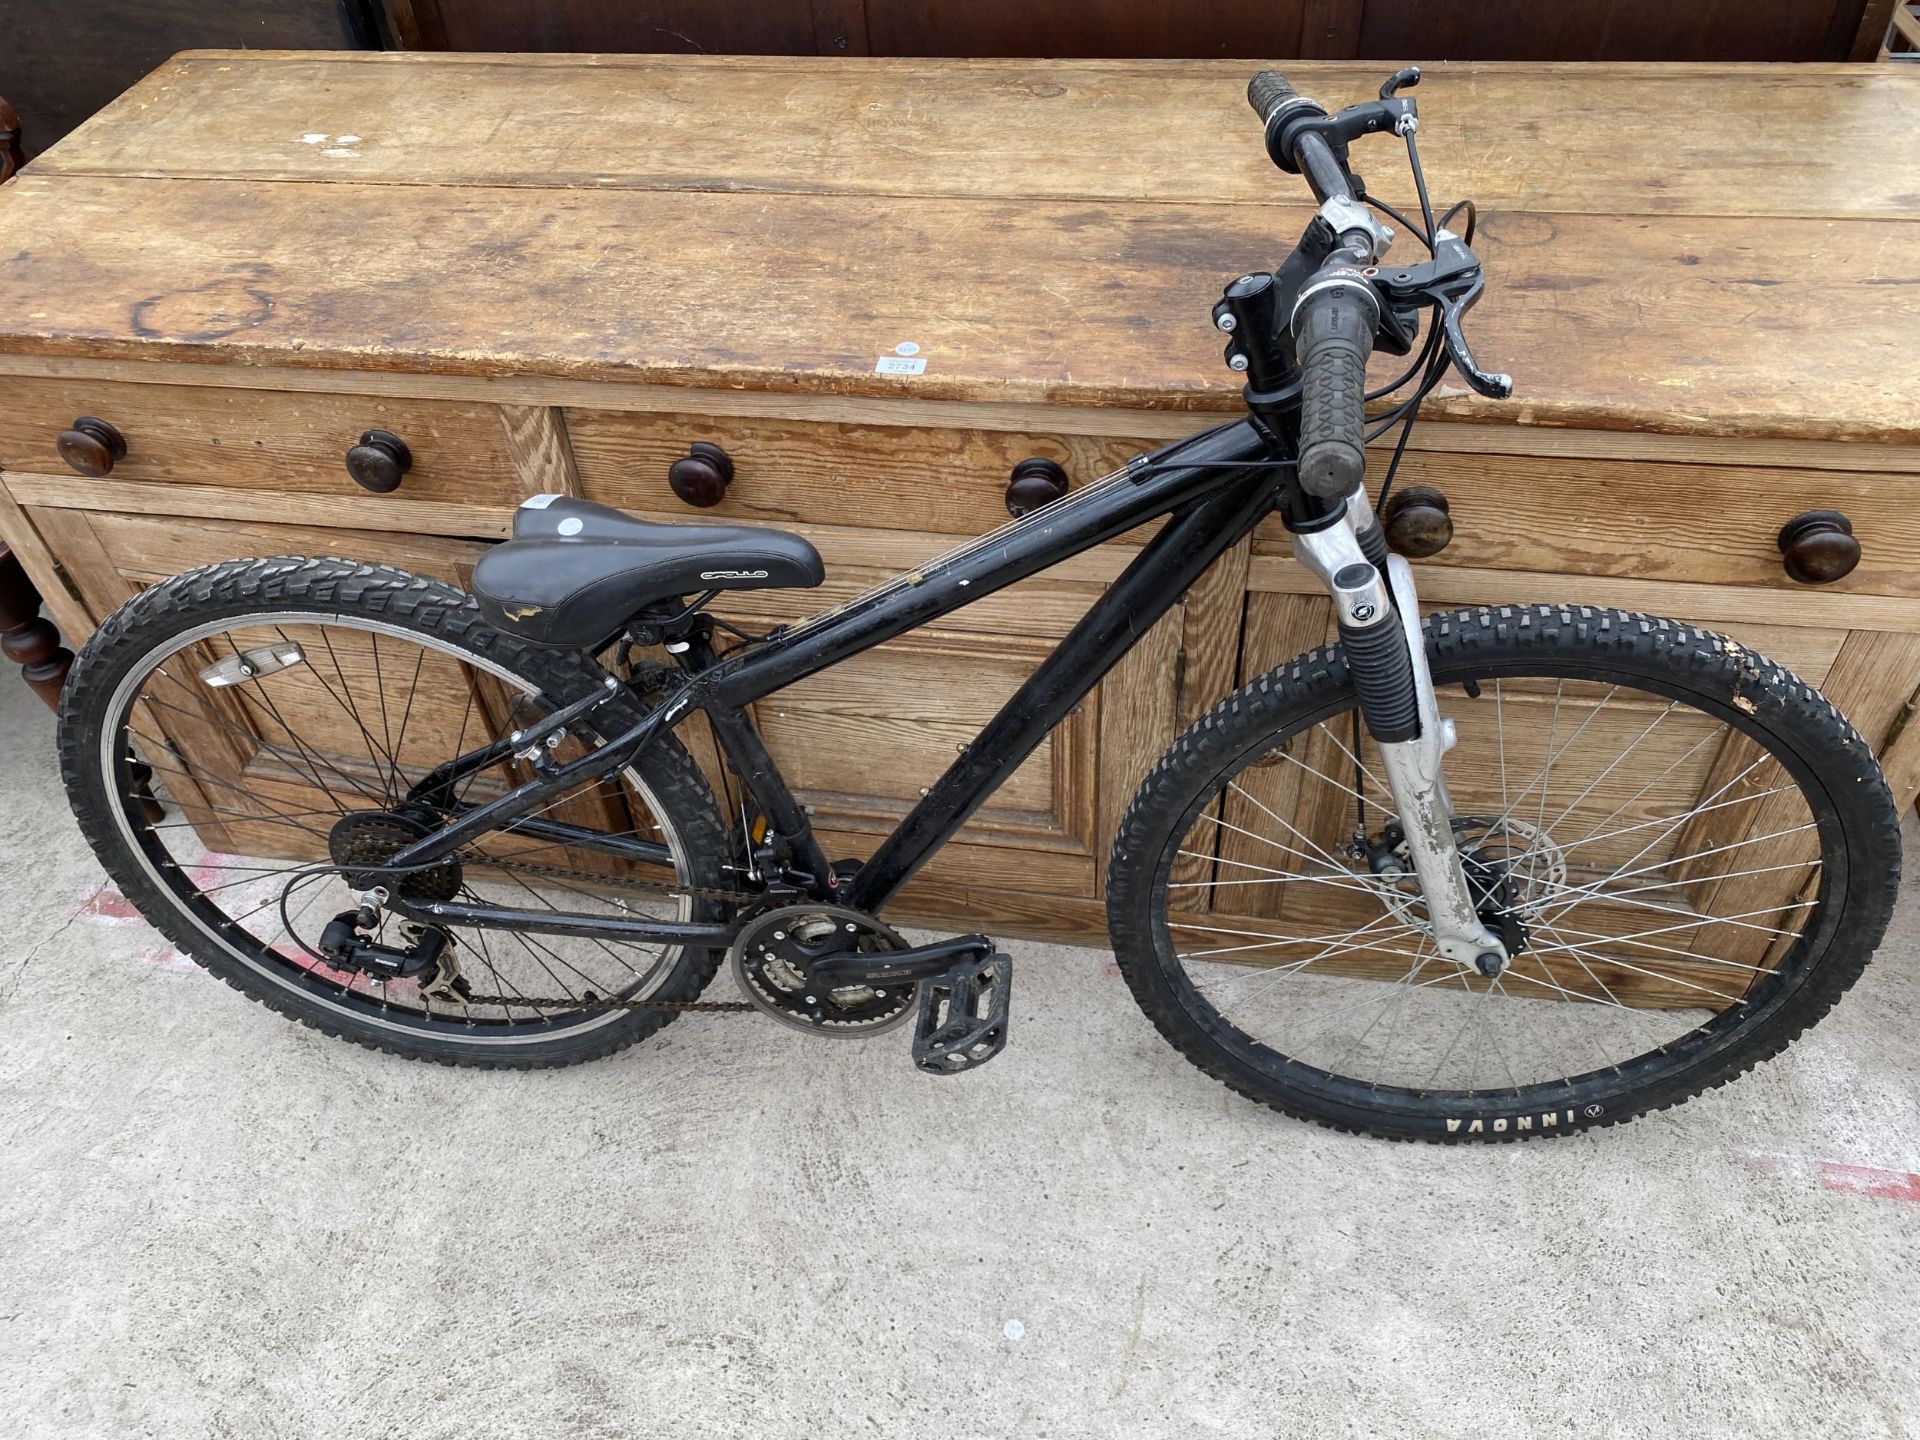 A BOYS MOUNTAIN BIKE WITH FRONT SUSPENSION AND 18 SPEED SHIMANO GEAR SYSTEM